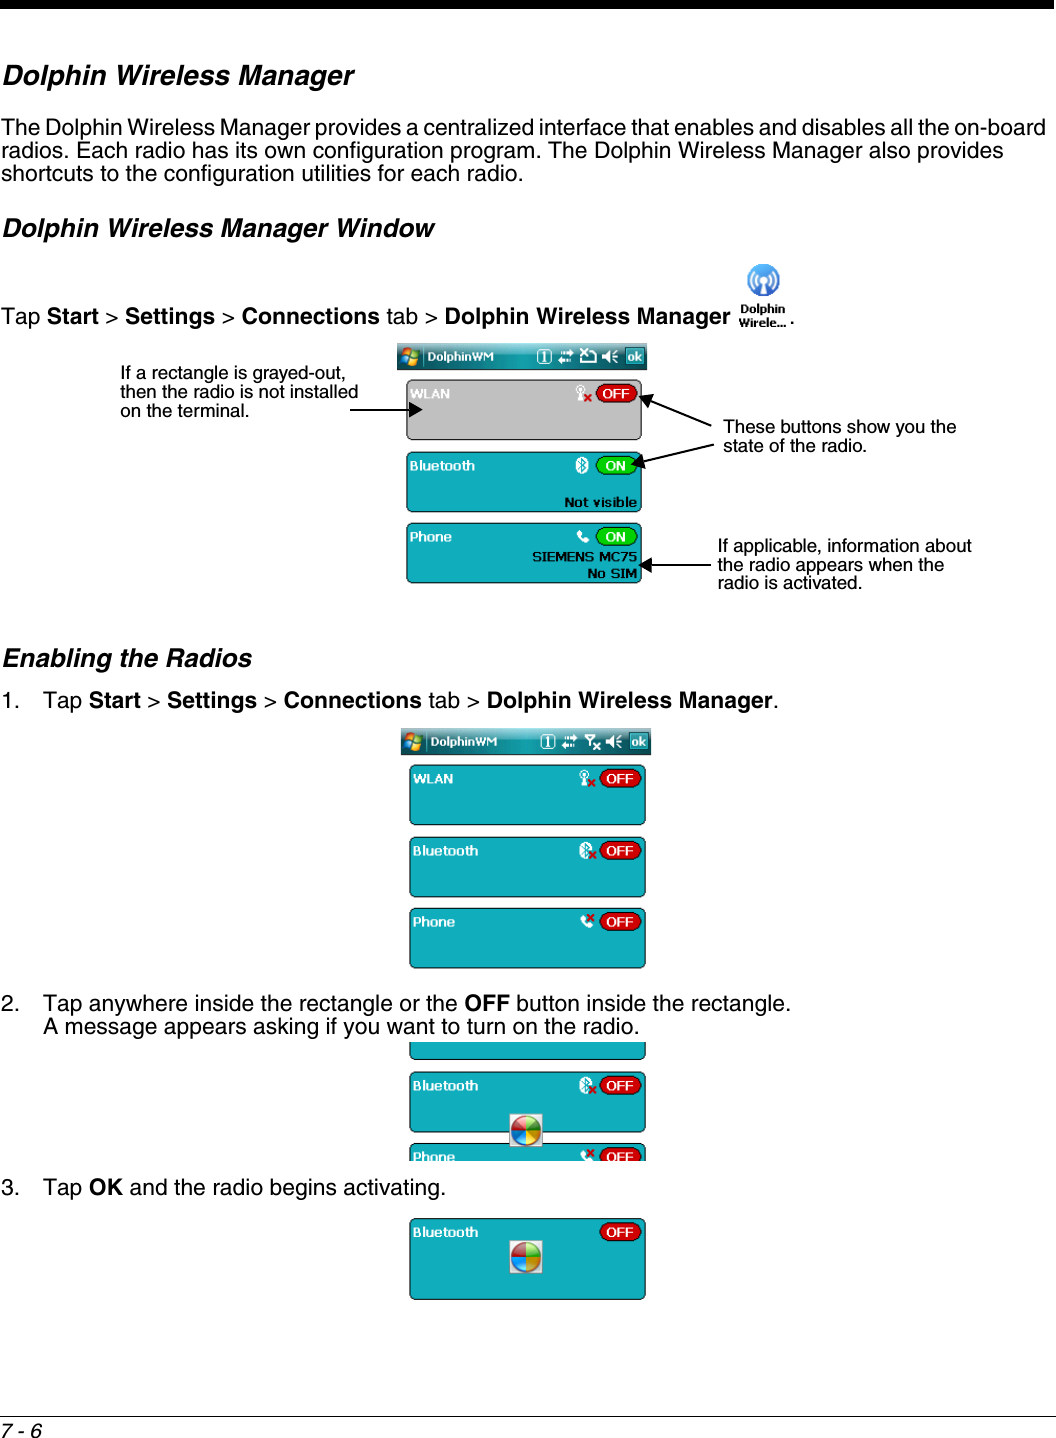 7 - 6Dolphin Wireless ManagerThe Dolphin Wireless Manager provides a centralized interface that enables and disables all the on-board radios. Each radio has its own configuration program. The Dolphin Wireless Manager also provides shortcuts to the configuration utilities for each radio. Dolphin Wireless Manager WindowTap Start &gt; Settings &gt; Connections tab &gt; Dolphin Wireless Manager  .Enabling the Radios1. Tap Start &gt; Settings &gt; Connections tab &gt; Dolphin Wireless Manager. 2. Tap anywhere inside the rectangle or the OFF button inside the rectangle.  A message appears asking if you want to turn on the radio.3. Tap OK and the radio begins activating.If a rectangle is grayed-out, then the radio is not installed on the terminal.If applicable, information about the radio appears when the radio is activated.These buttons show you the state of the radio.